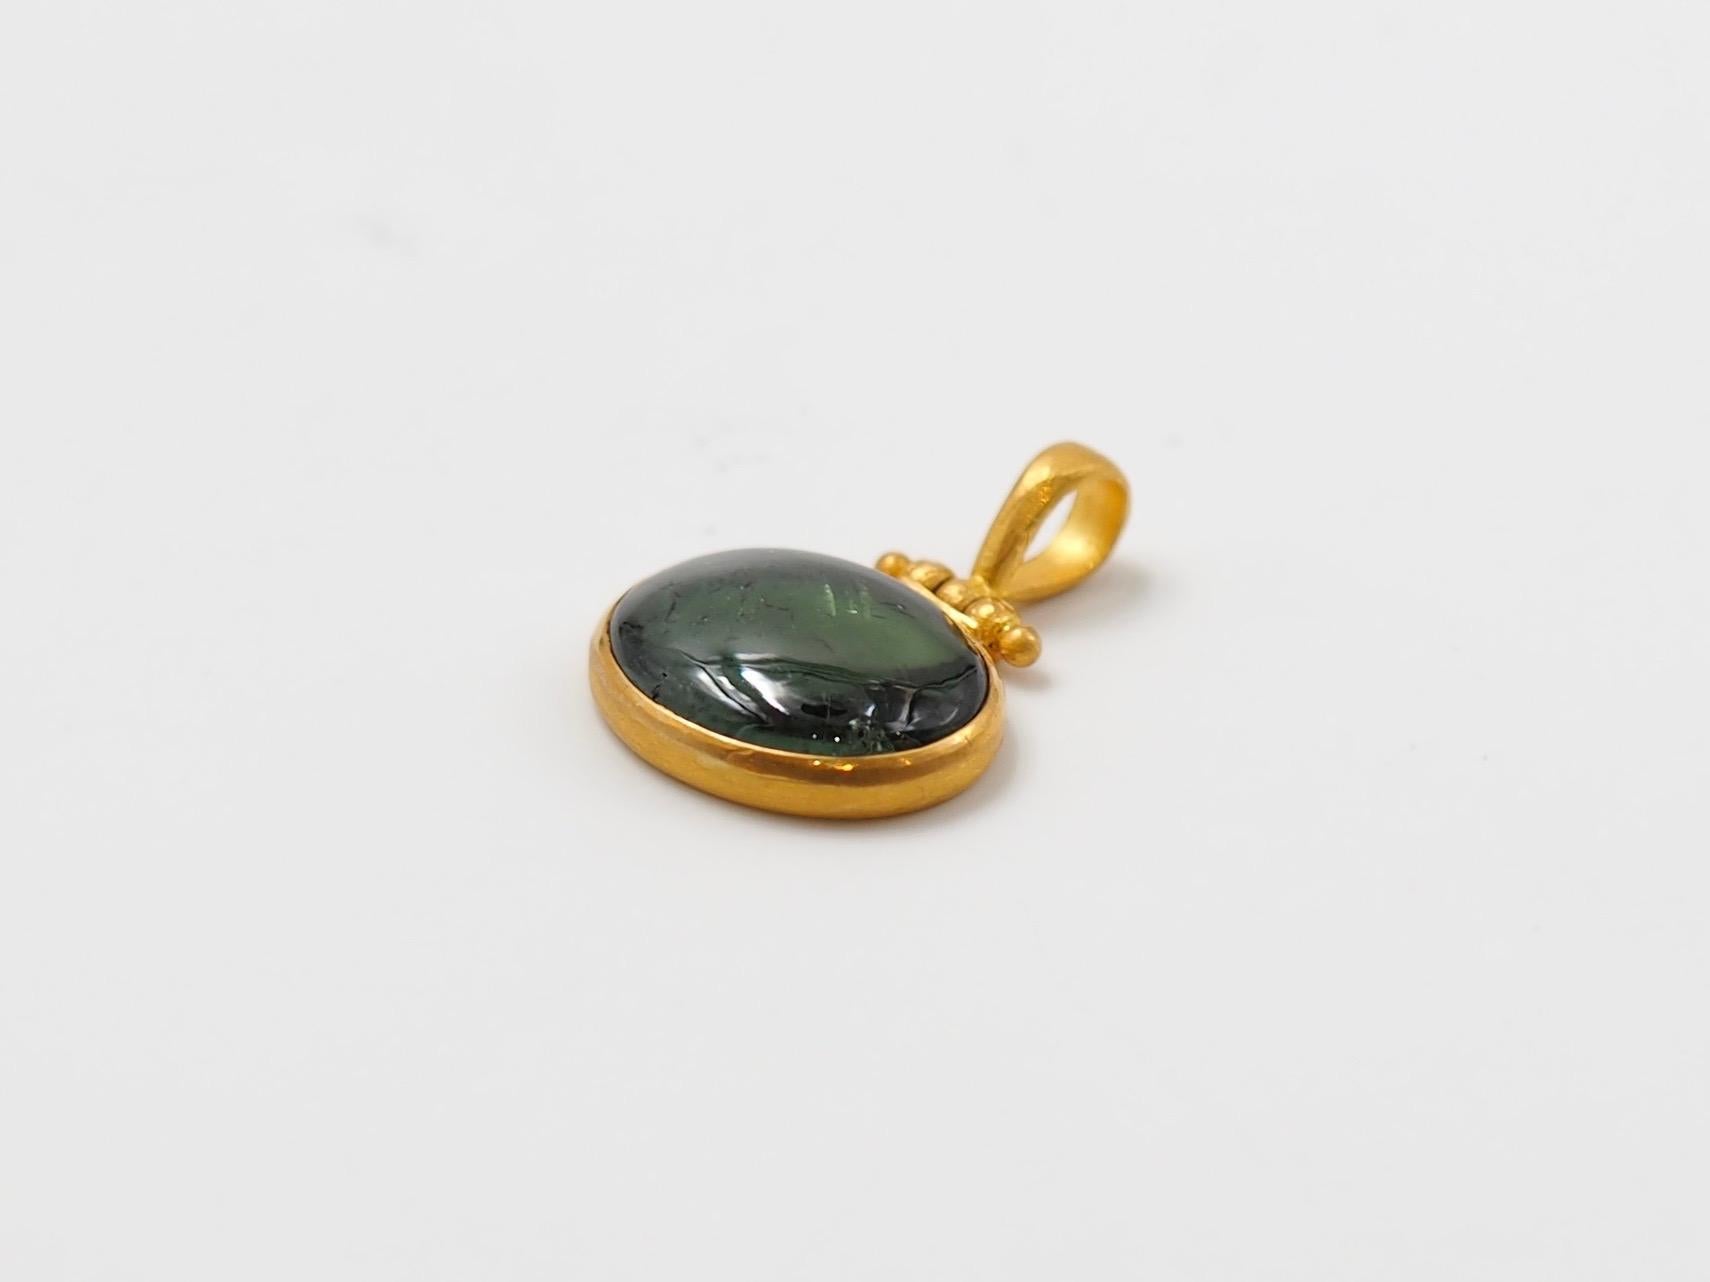 This pendant, by Scrives, is composed of a green tourmaline cabochon of 6 cts. The tourmaline is a deep green colour and exhibit visible natural and typical inclusions. 
The stone is set in a 22 karat gold circle. The top part is a swivel-hook with